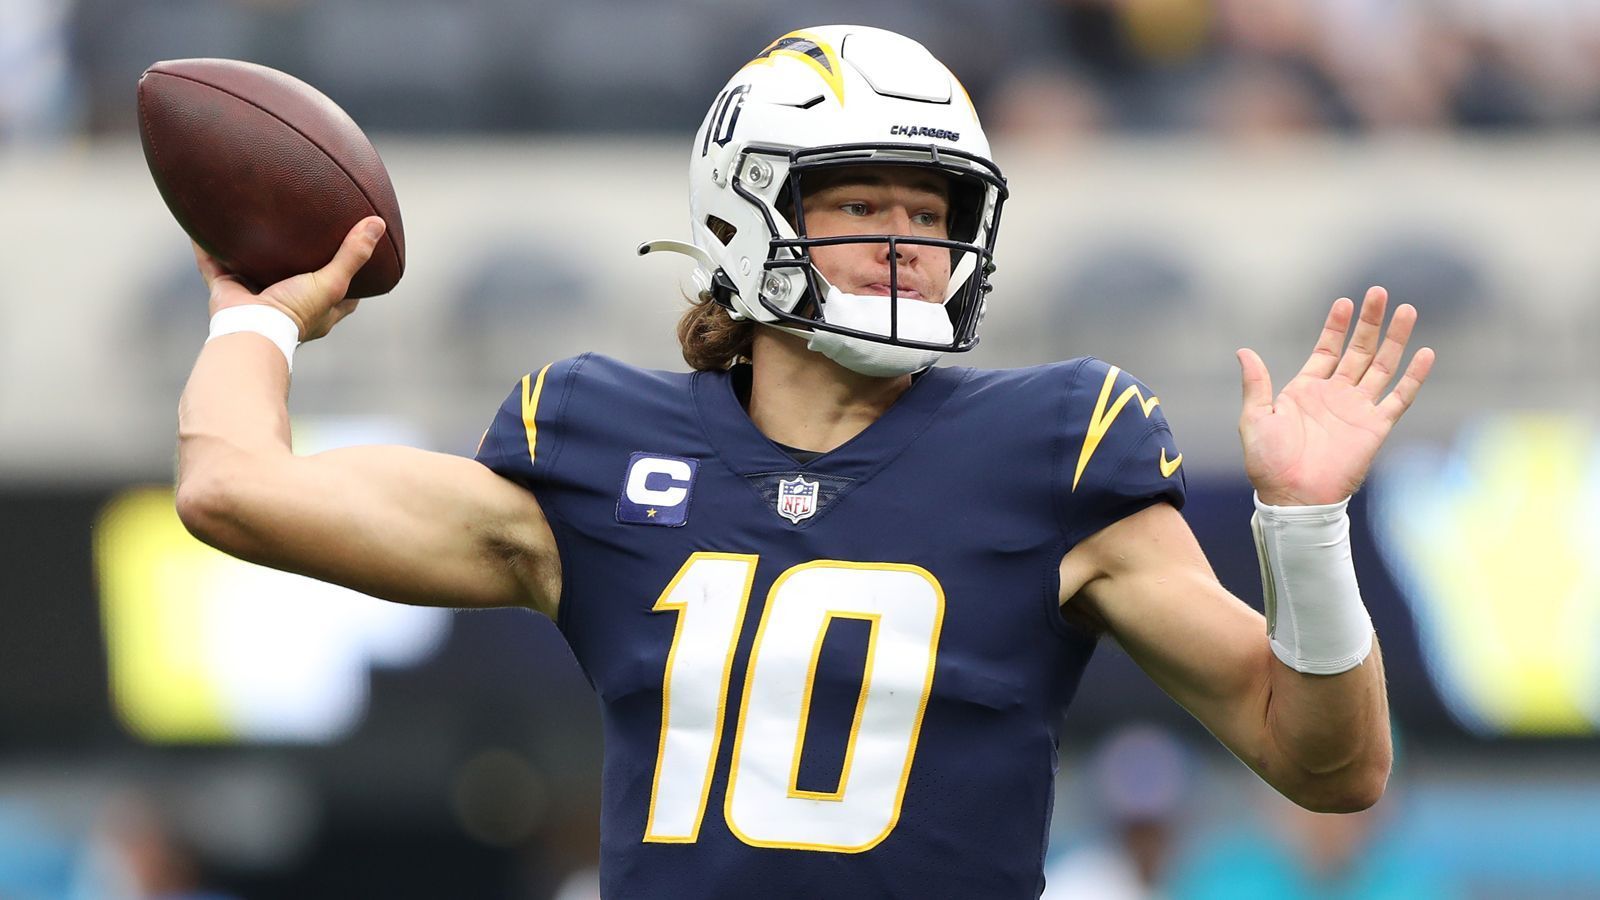 
                <strong>Justin Herbert (Los Angeles Chargers)</strong><br>
                &#x2022; <strong>Position</strong>: Quarterback<br>&#x2022; <strong>Durchschnittlicher Top-Verdiener Quarterbacks</strong>: Aaron Rodgers (<strong>50,3</strong> Millionen Dollar jährlich)<br>&#x2022; <strong>Durchschnittlicher Verdienst Justin Herbert</strong>: <strong>6,4</strong> Millionen Dollar jährlich<br>&#x2022; <strong>Top-Verdiener Quarterbacks 2022</strong>: Ryan Tannehill (<strong>38,6</strong> Millionen Dollar)<br>&#x2022; <strong>Verdienst 2022 Justin Herbert</strong>: <strong>7,2</strong> Millionen Dollar<br>
              